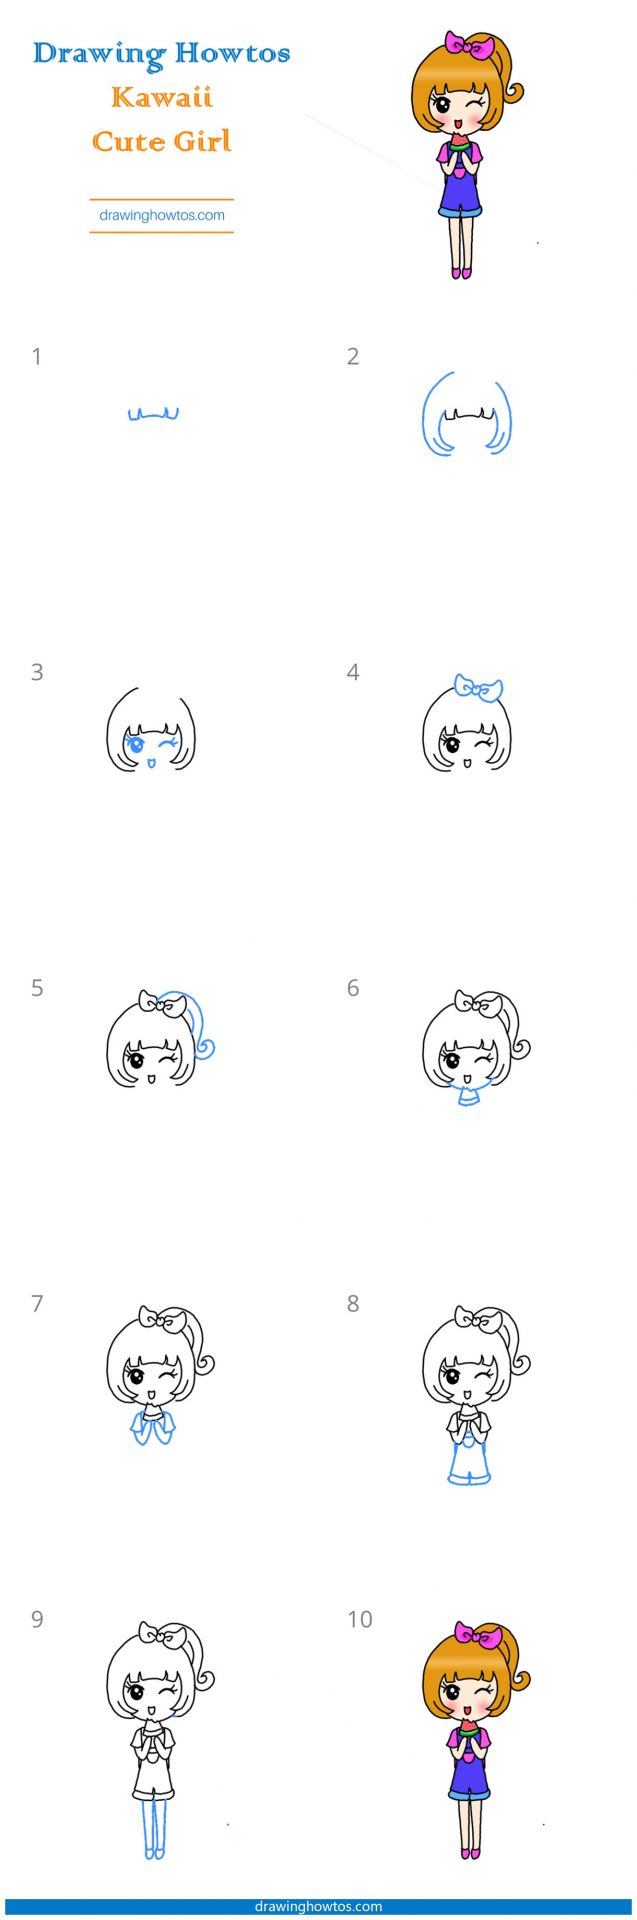 How to Draw a Kawaii Girl Eating Watermelon Step by Step